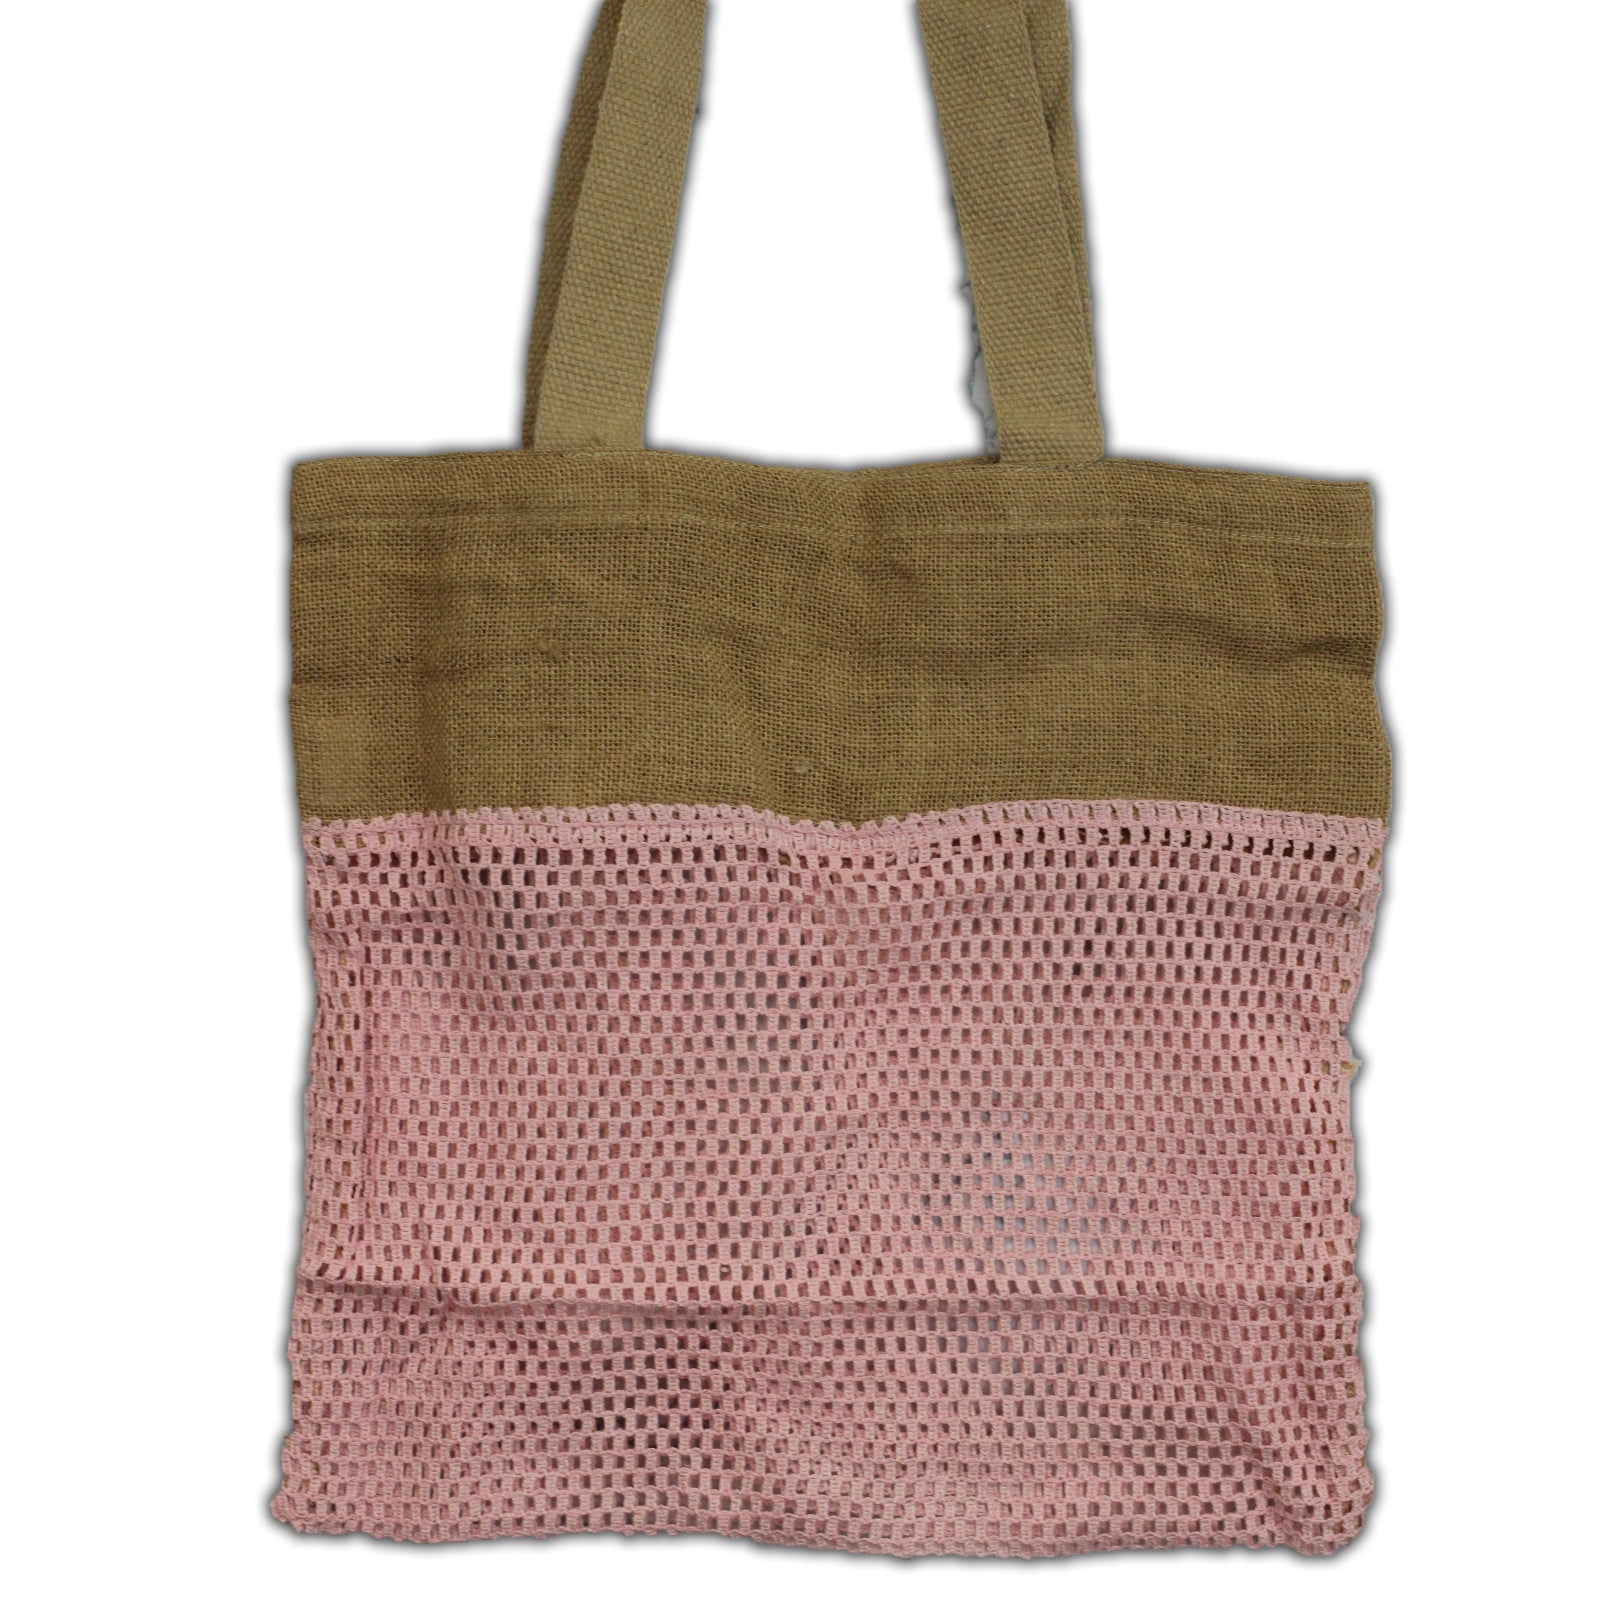 View Pure Soft Jute and Cotton Mesh Bag Rose information